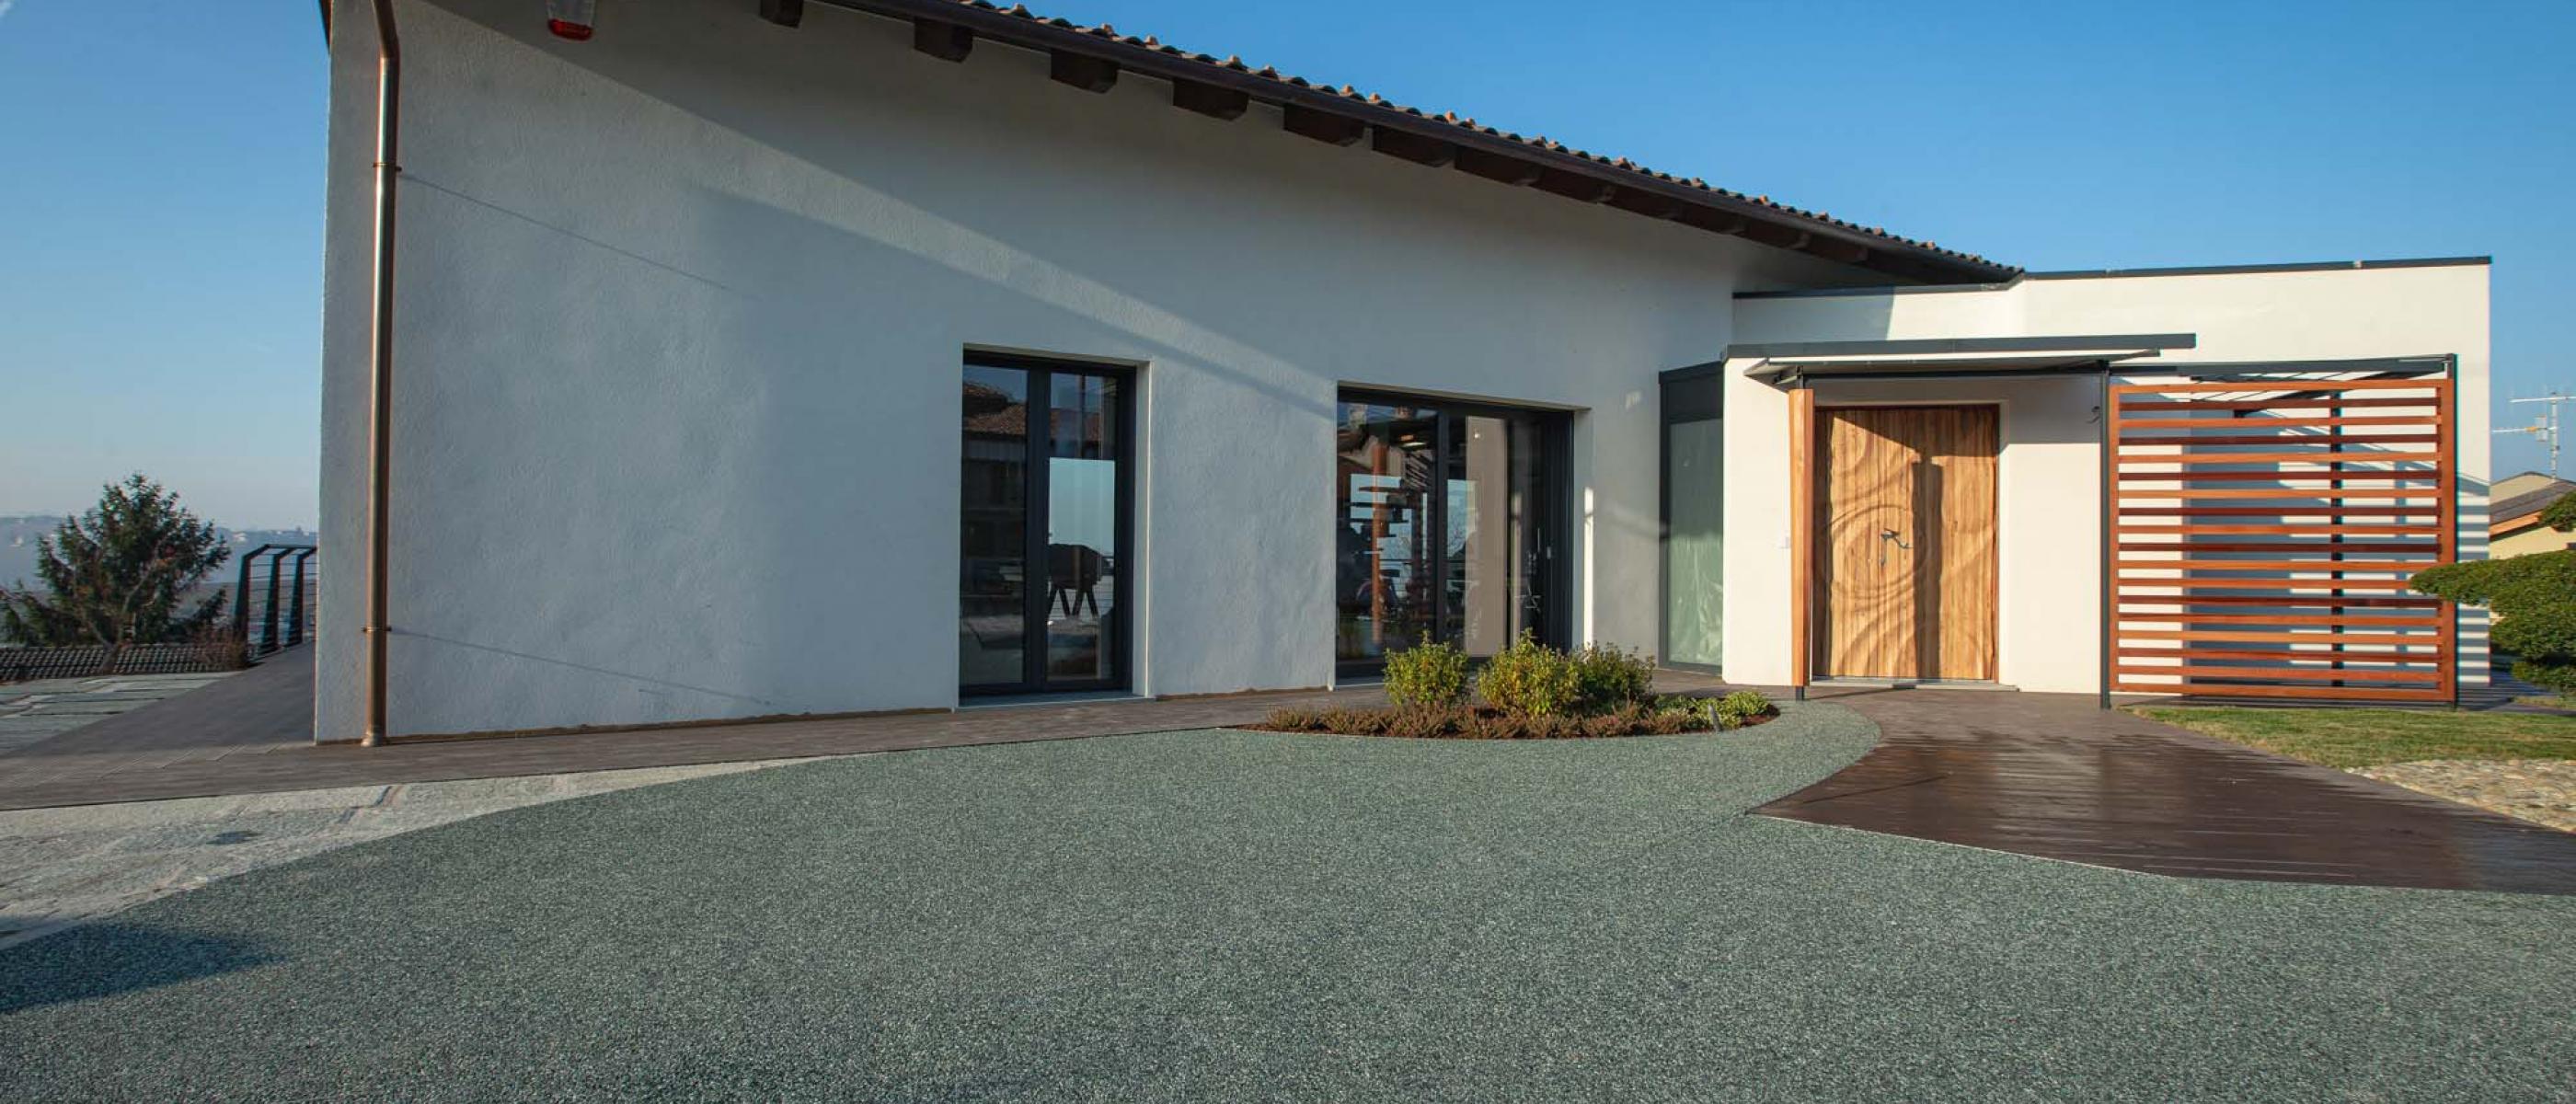 Driveway - Private residence